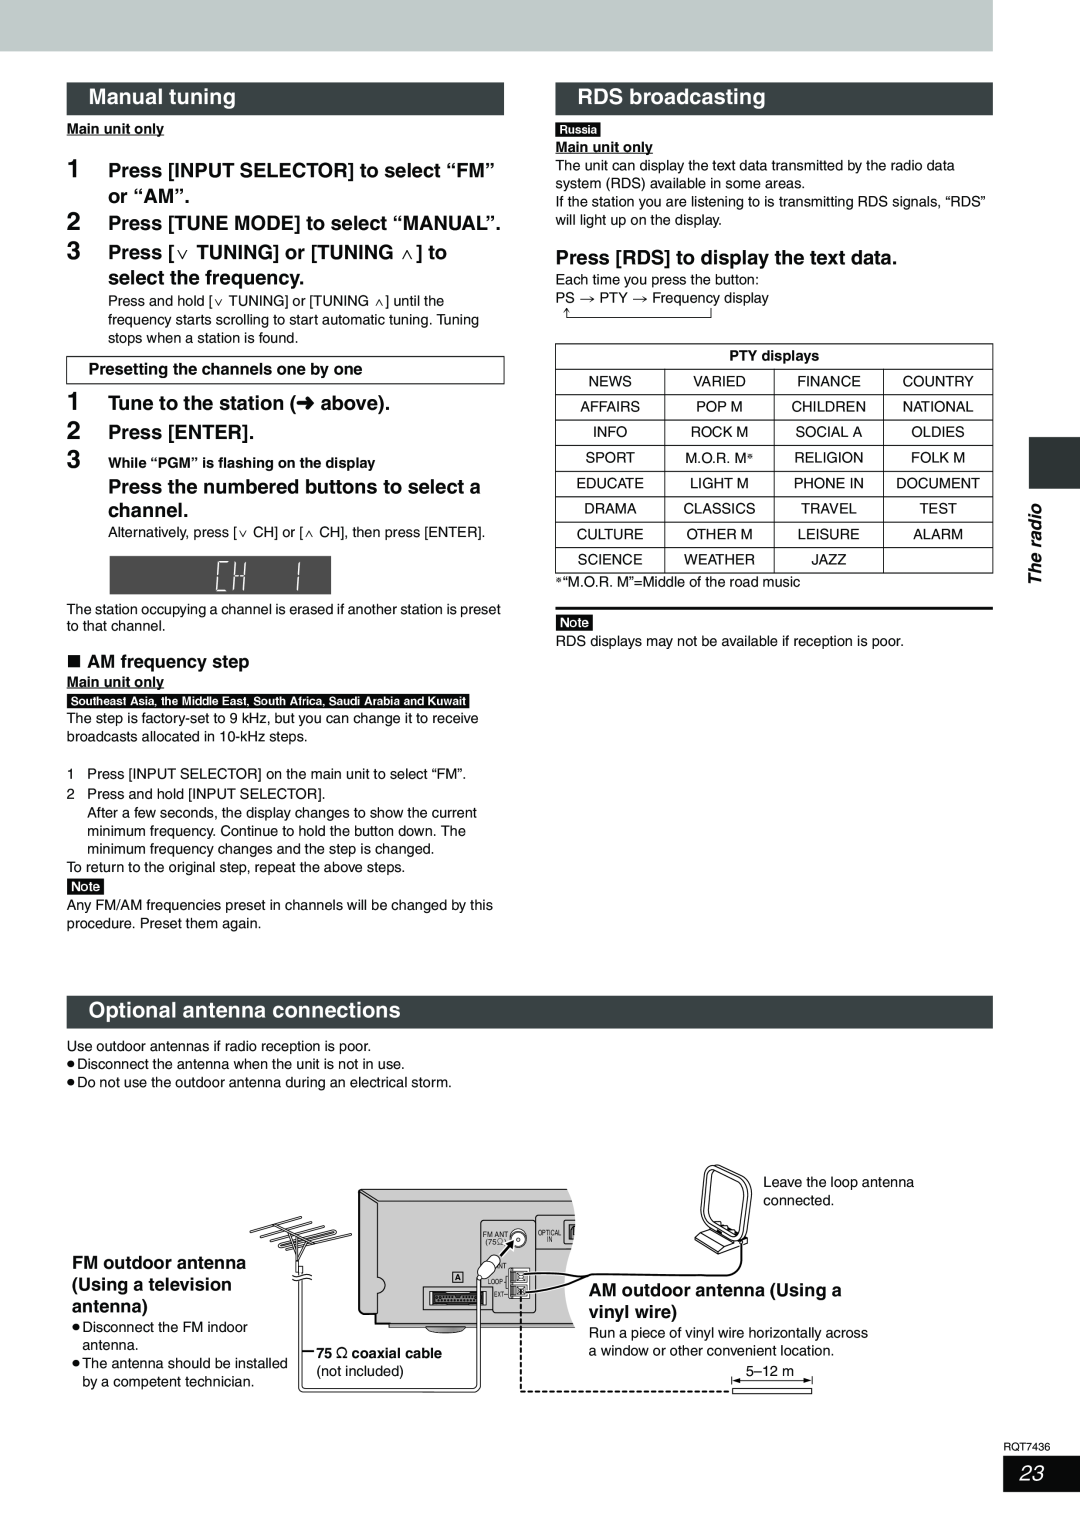 Panasonic SC-HT928 Manual tuning, RDS broadcasting, Optional antenna connections, 2Press TUNE MODE to select “MANUAL” 